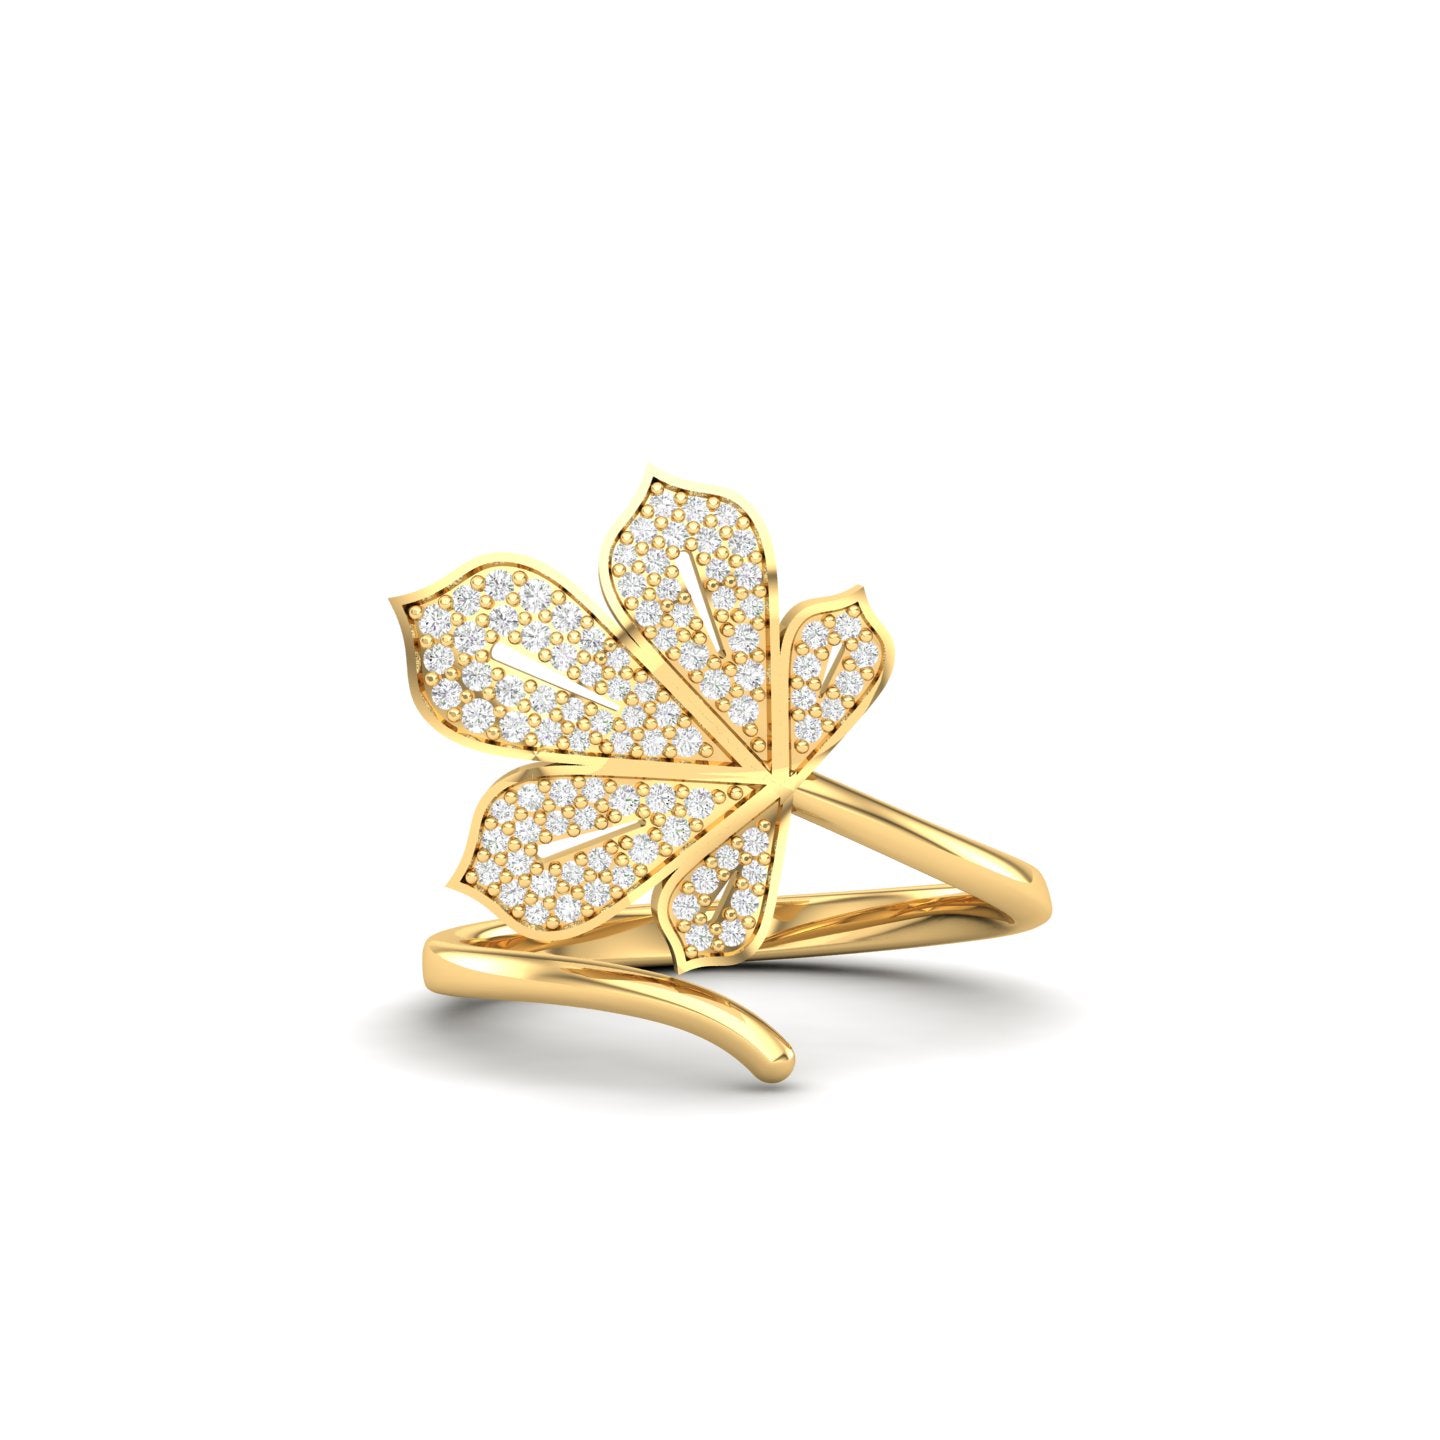 Maurya Maple Ring with Round Diamond Accents